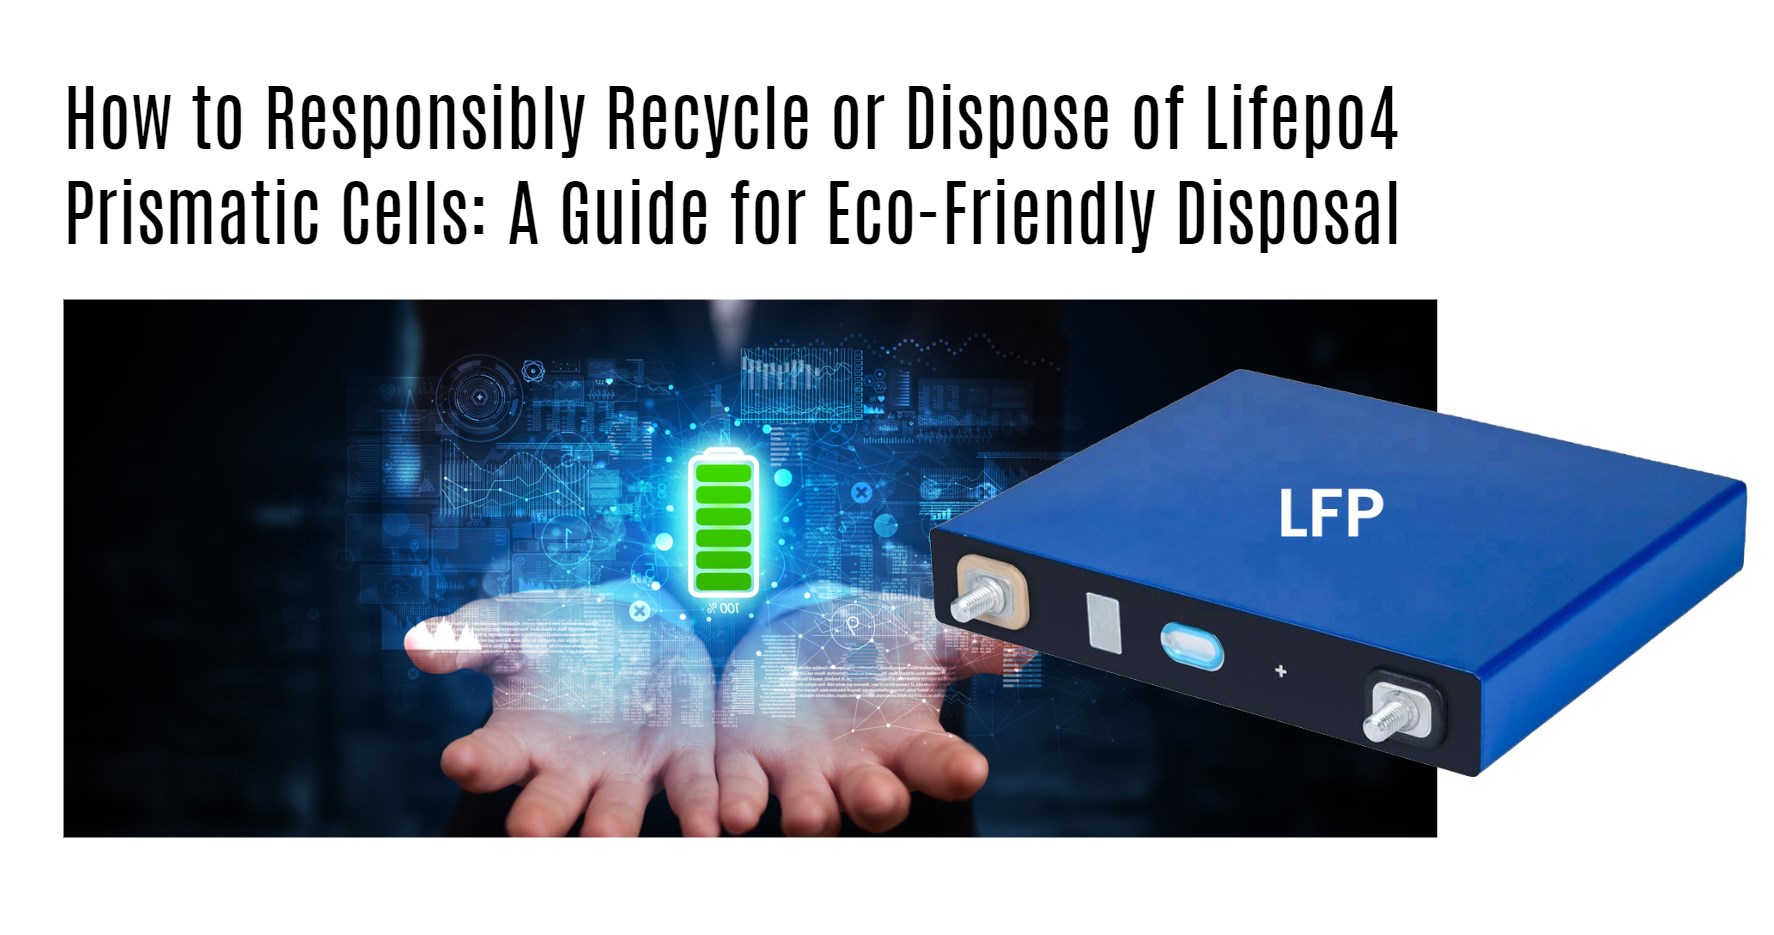 How to Responsibly Recycle or Dispose of Lifepo4 Prismatic Cells: A Guide for Eco-Friendly Disposal